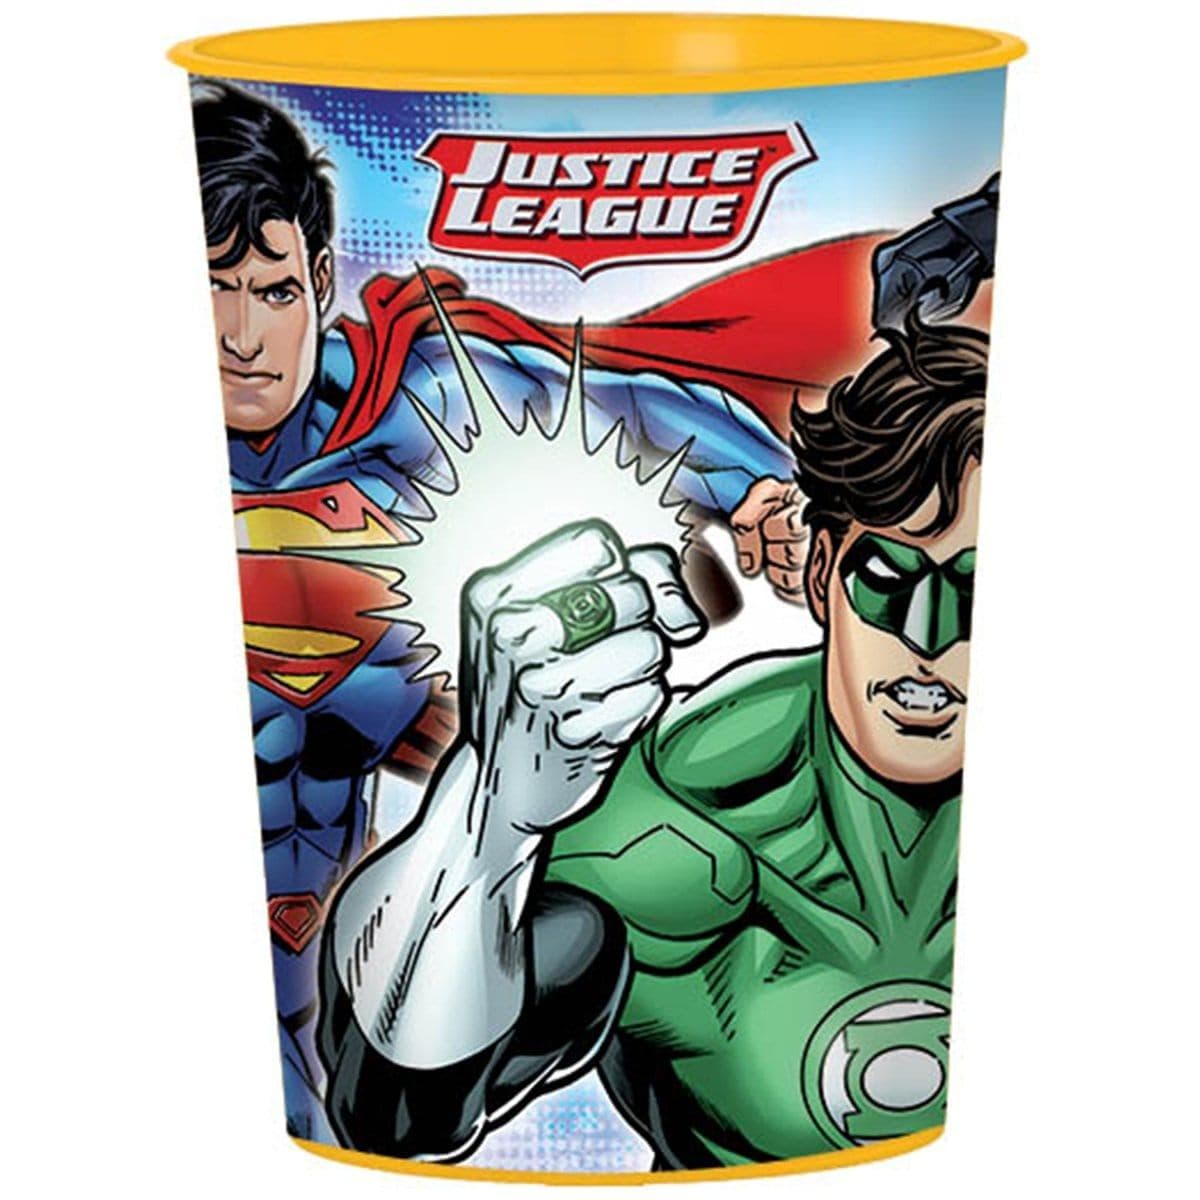 Buy Kids Birthday Justice League plastic favor cup sold at Party Expert